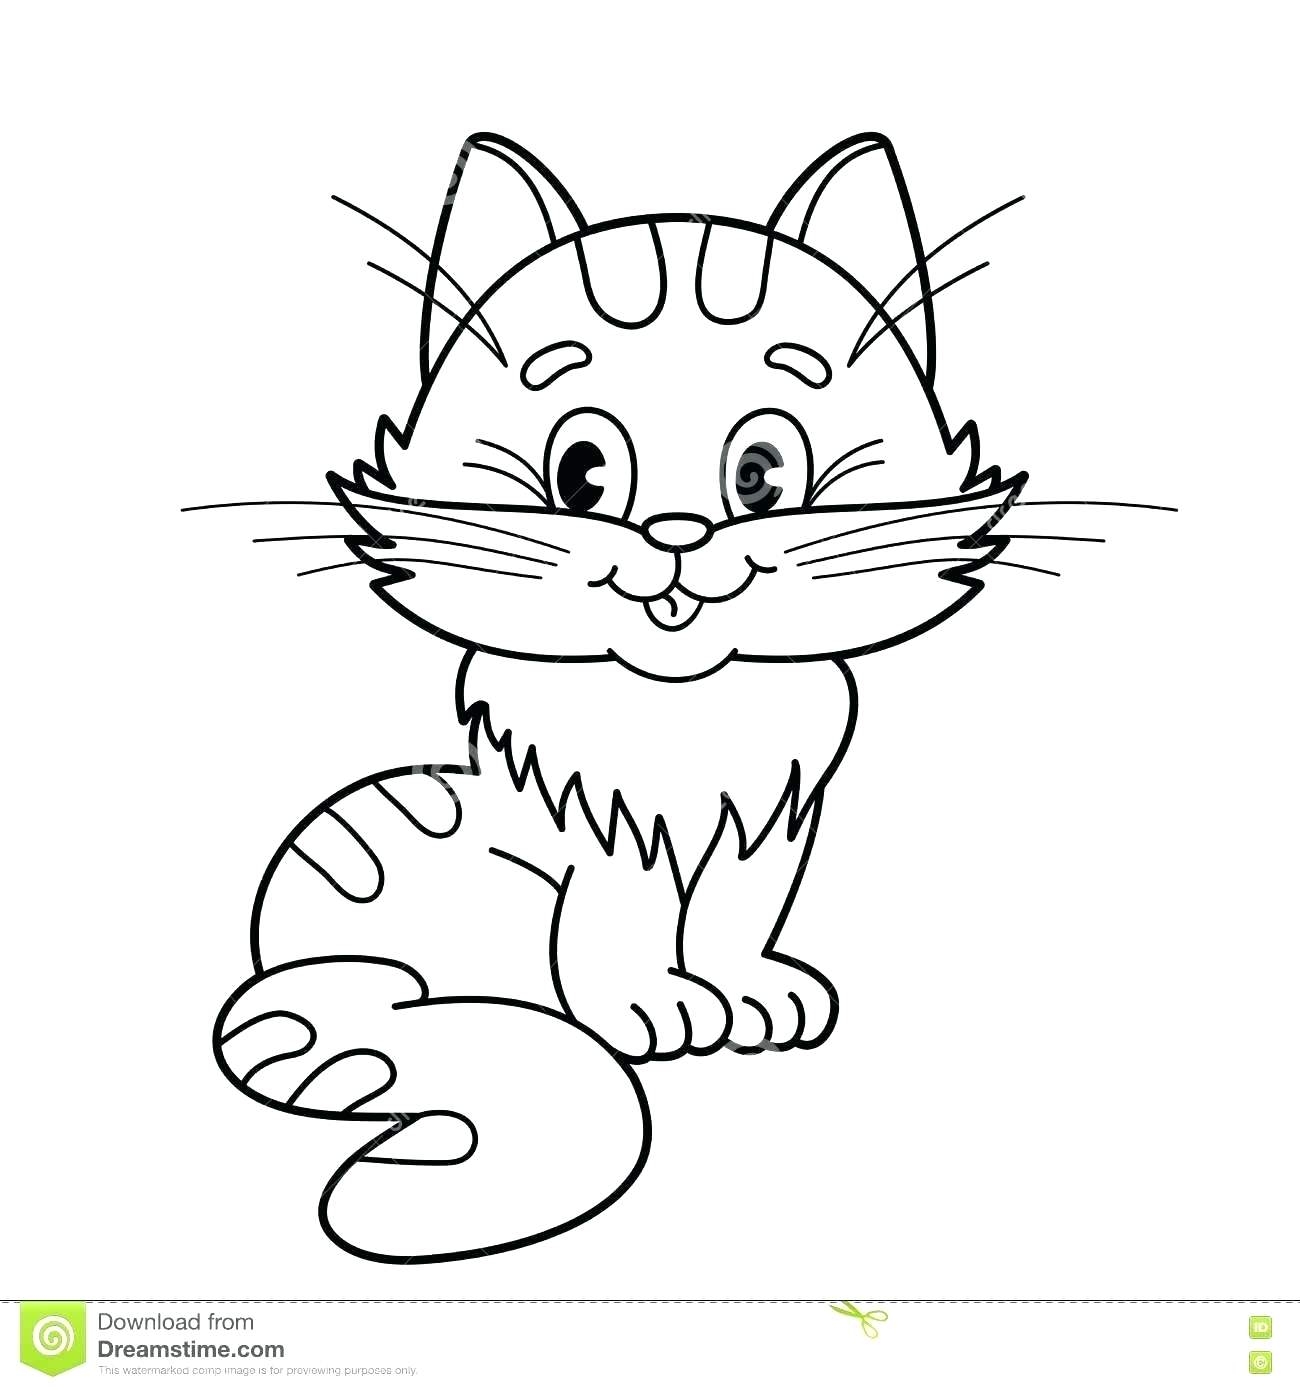 Warrior Cats Printable Coloring Pages at GetColorings.com | Free